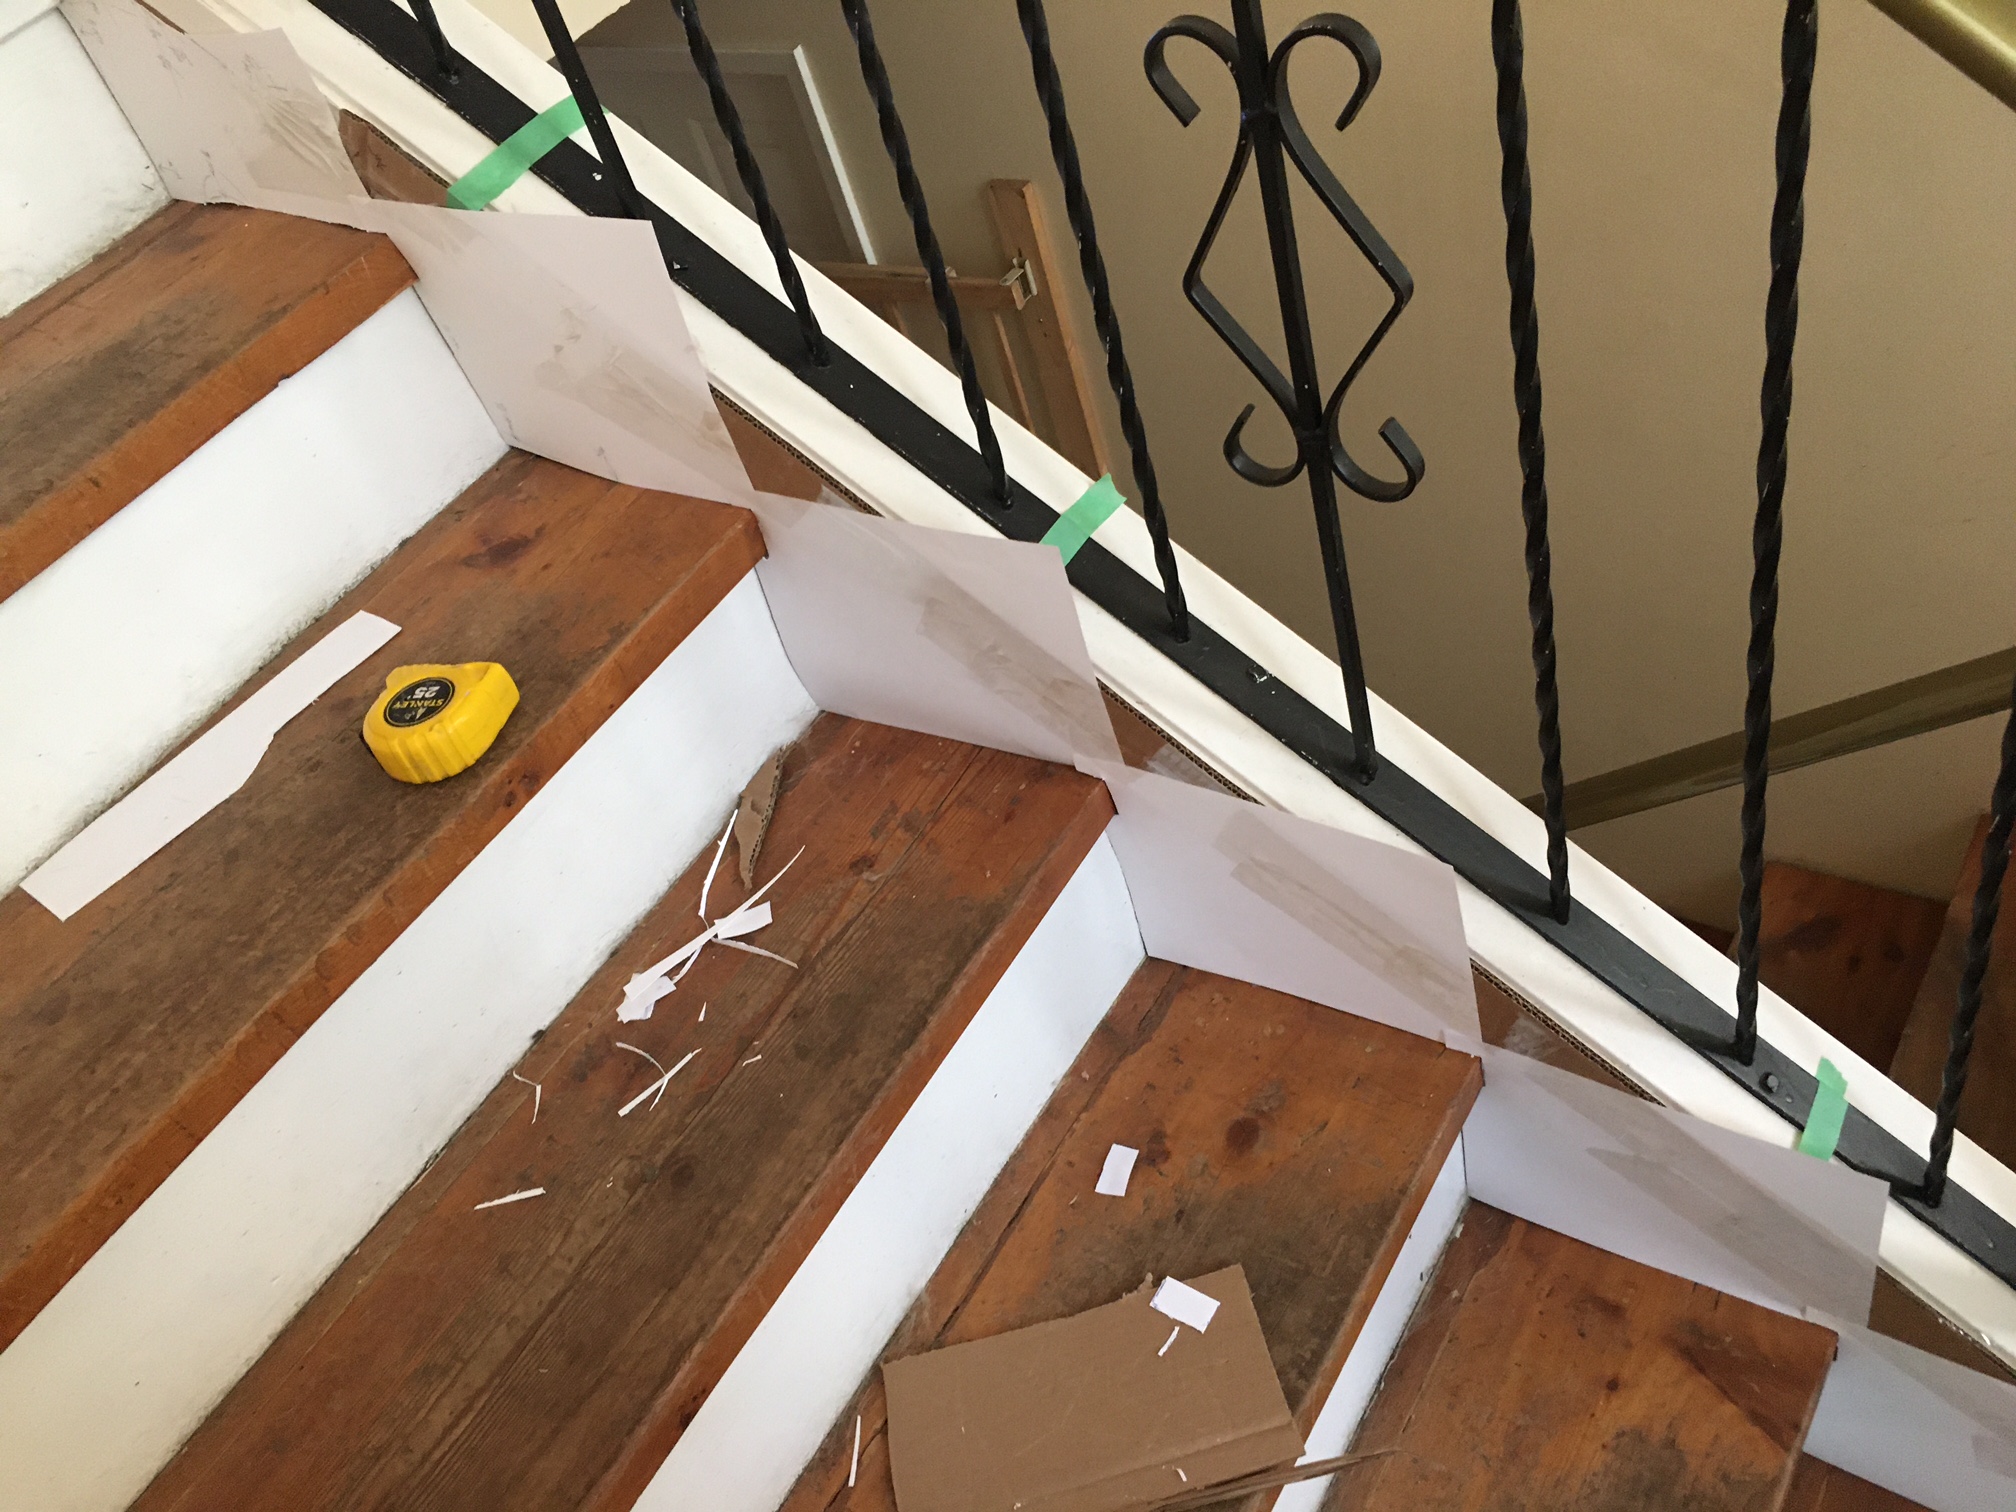 flooring - Should a skirt board on a stair case be installed over the  treads? - Home Improvement Stack Exchange